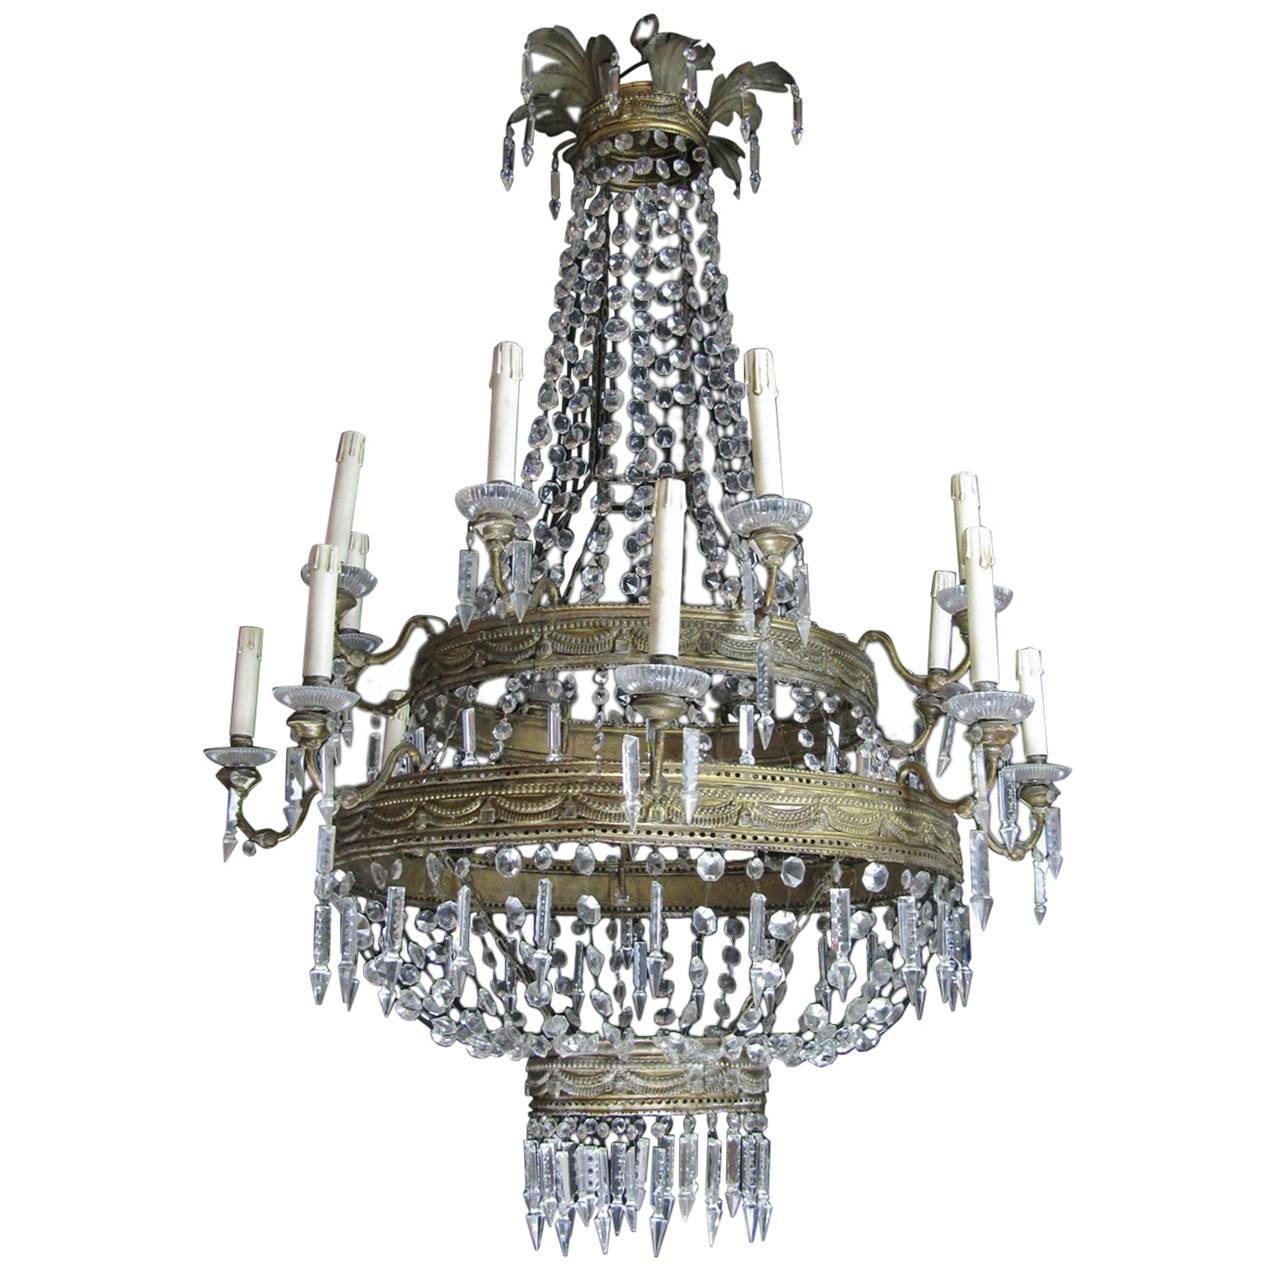 Magnificent antique Empire crystal and gilded brass chandelier, featuring two tiers supporting sixteen arms, dating back to late 18th century of Italian origin, coming from a Tuscan private palazzo in Florence.

The hand-made circular structure